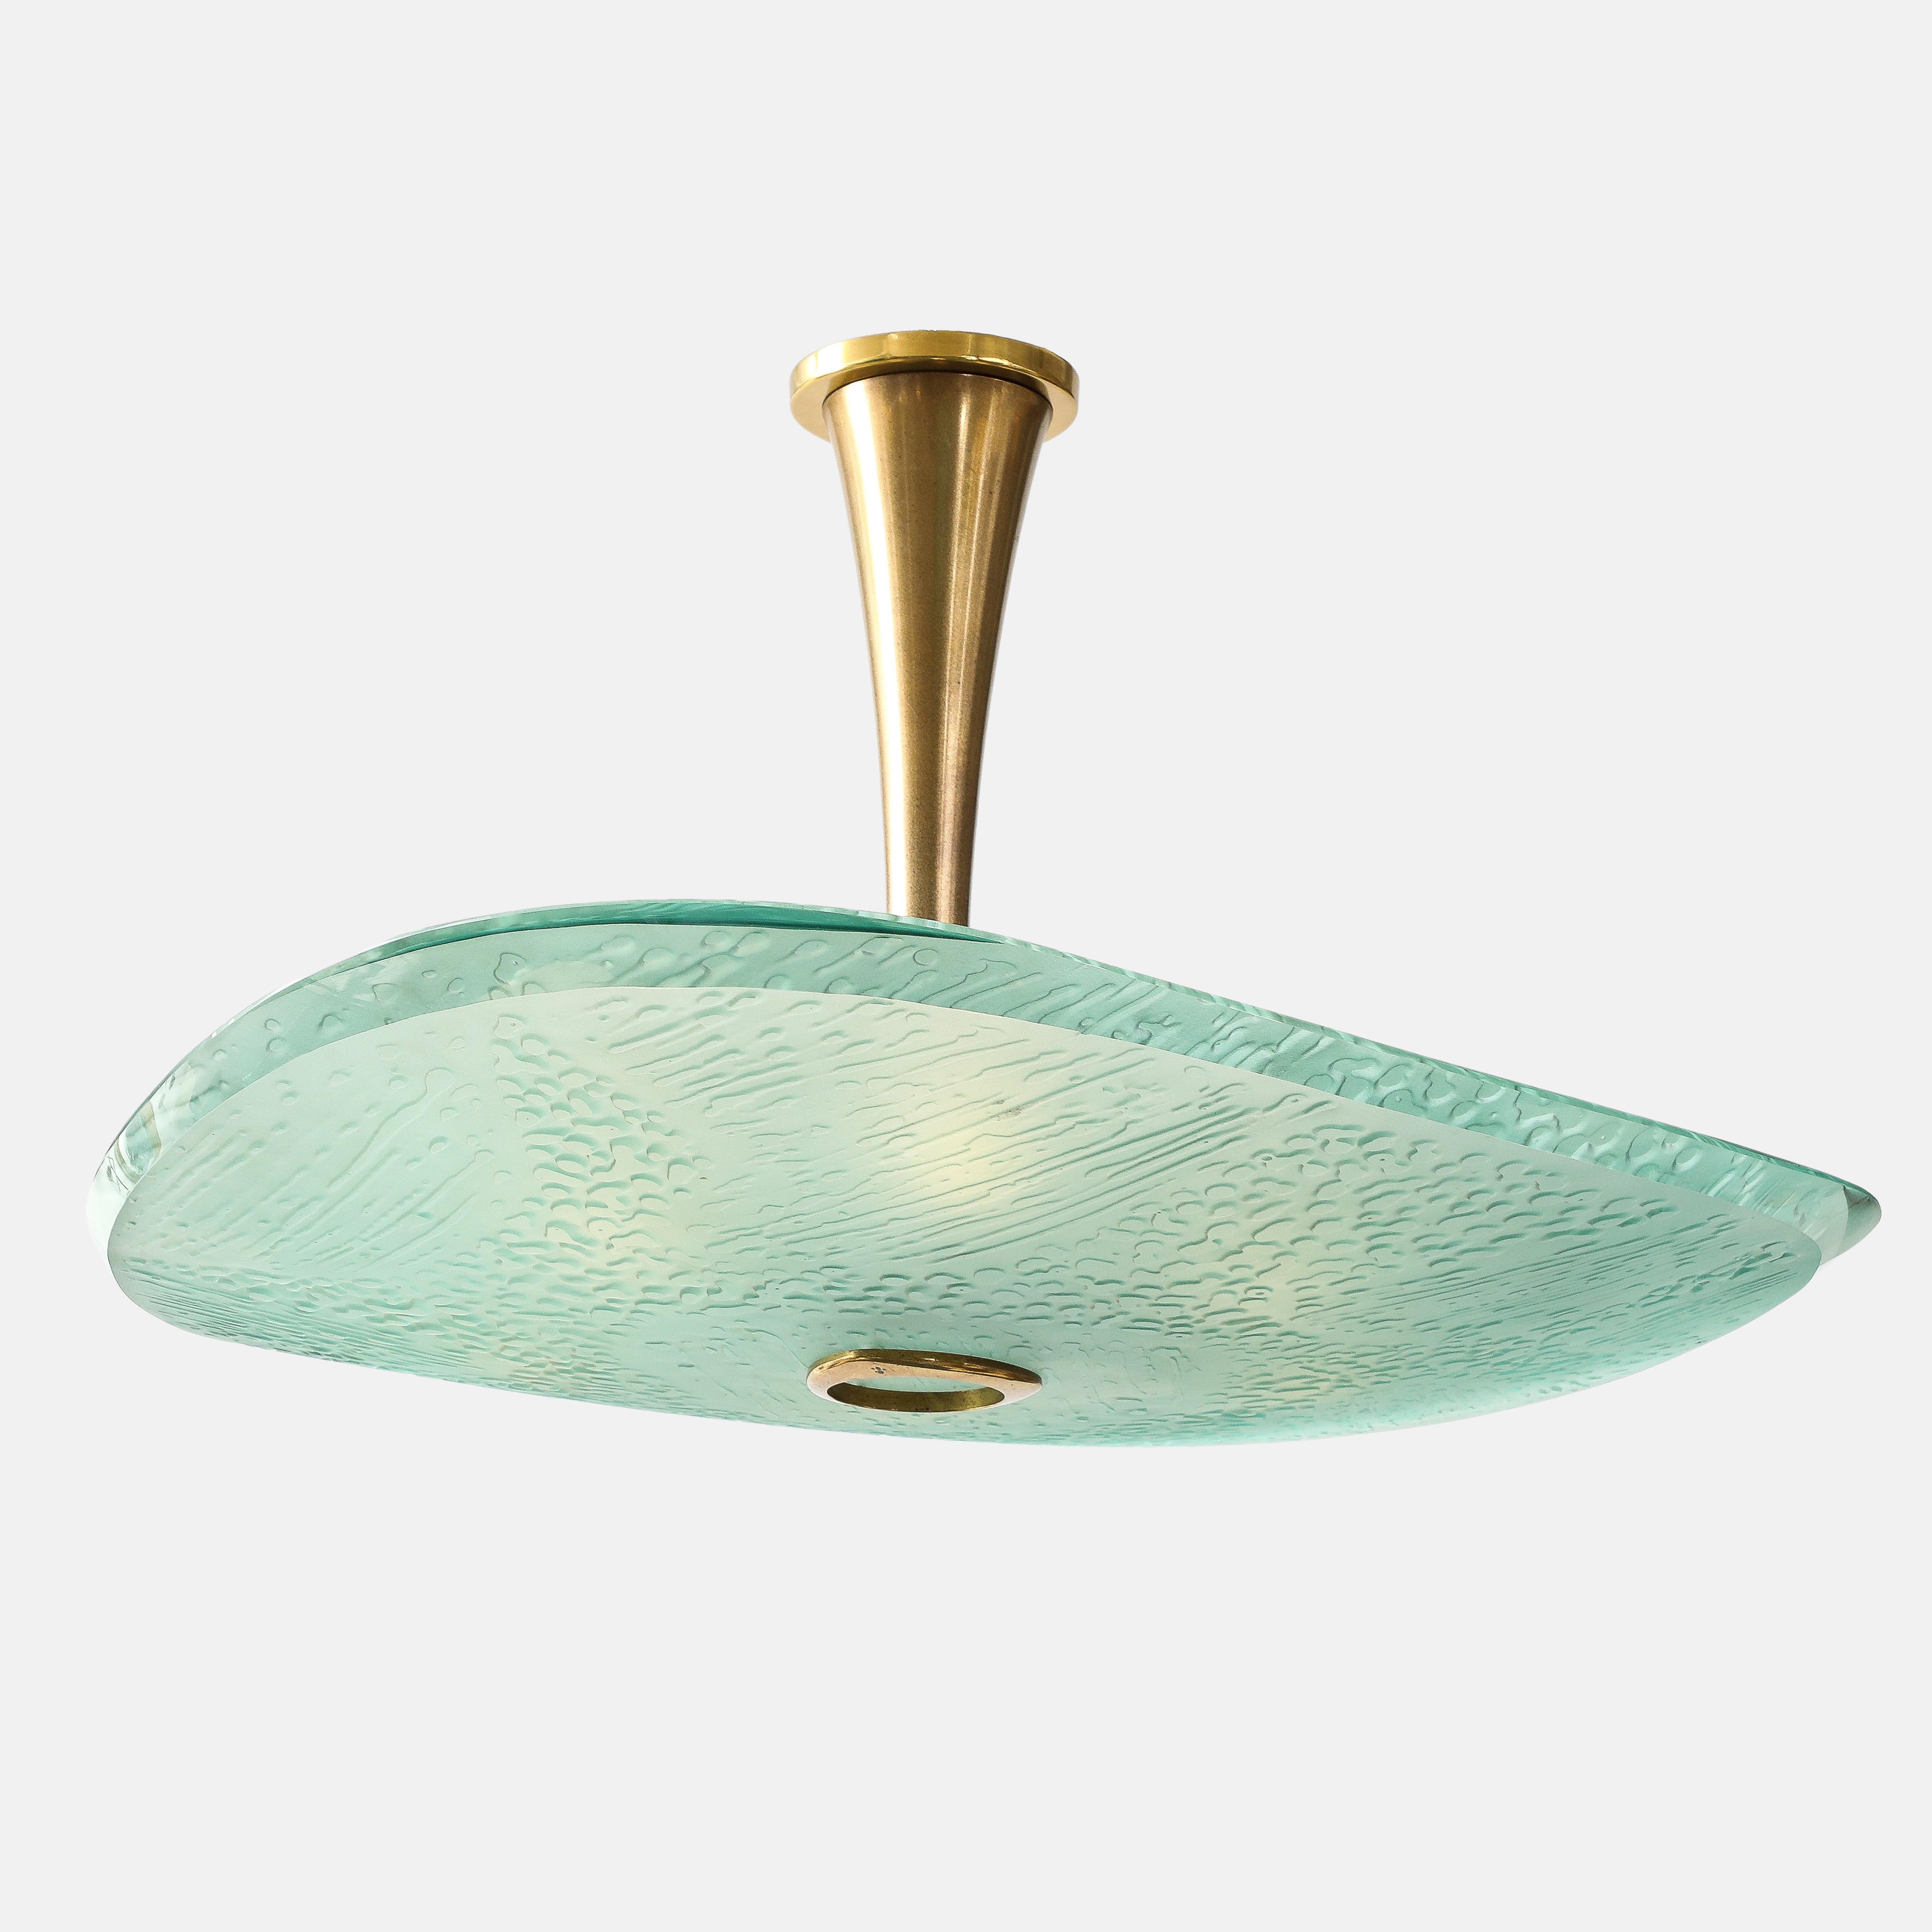 Max Ingrand for Fontana Arte rare exquisite ceiling light or chandelier model 2067 featuring a large thick acid-etched crystal glass diffuser with polished beveled edges supported by a central brass stem ending in a decorative brass element.  This